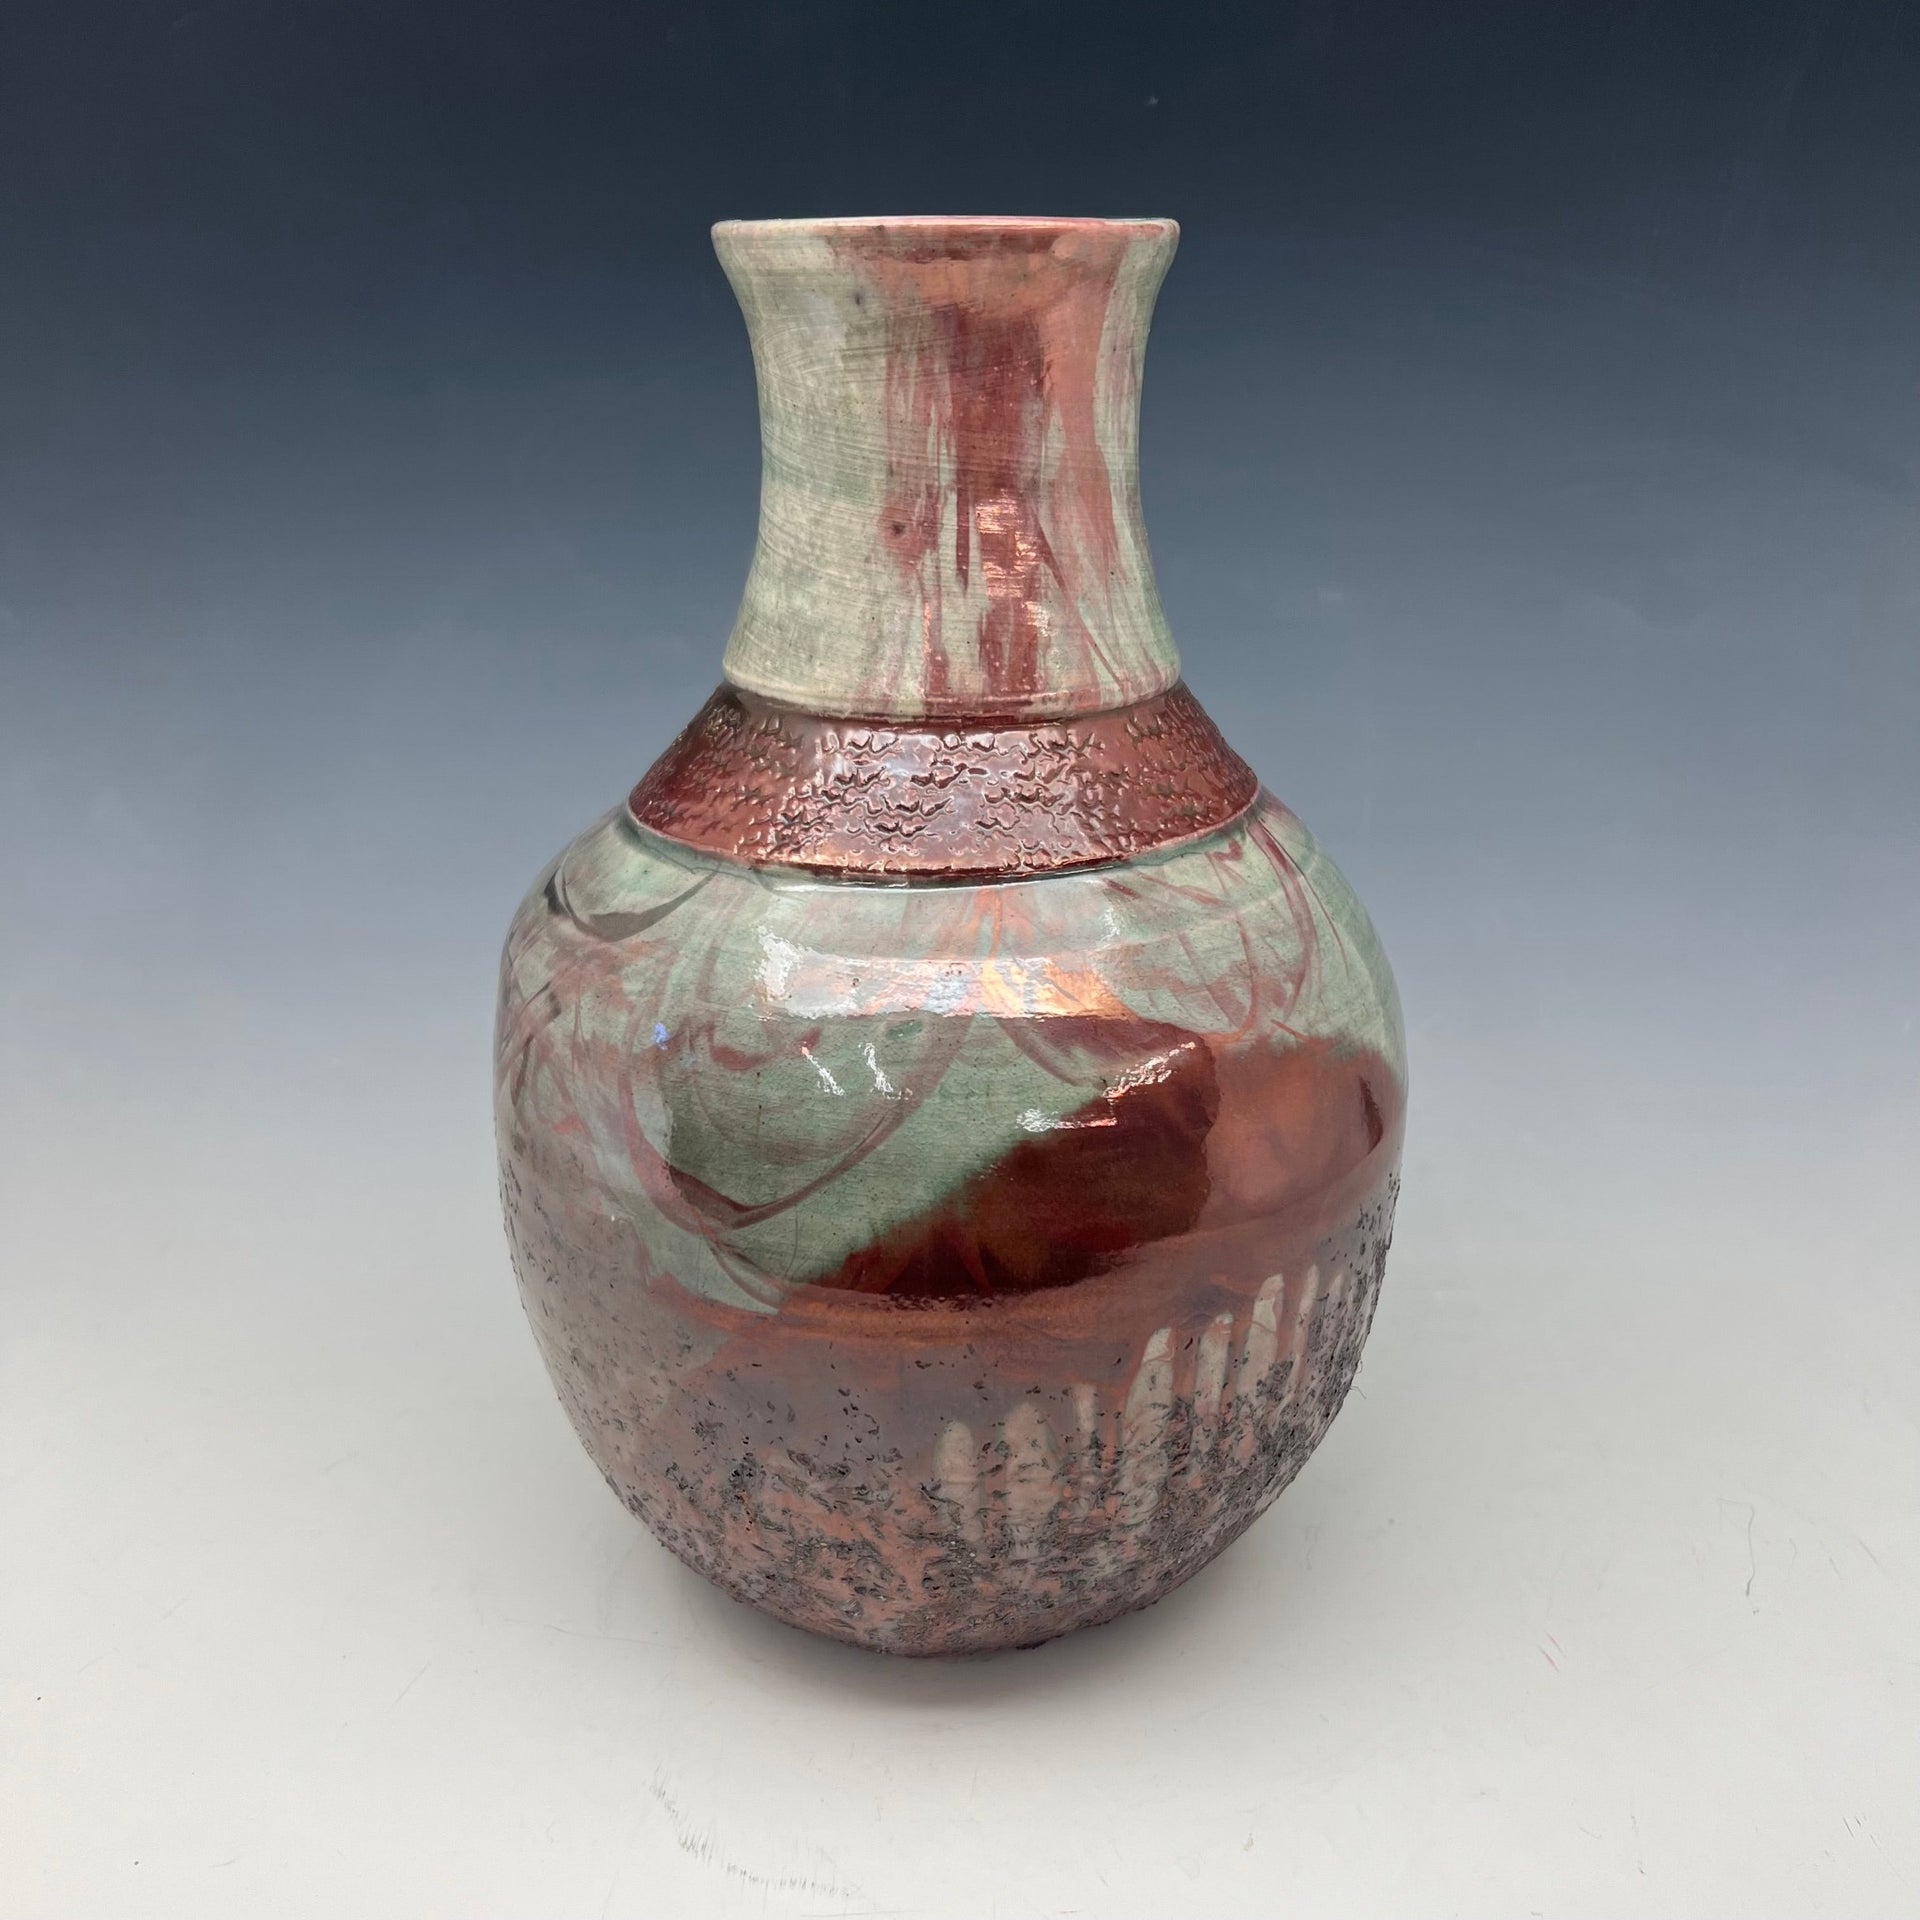 Raku bottle in teal and copper